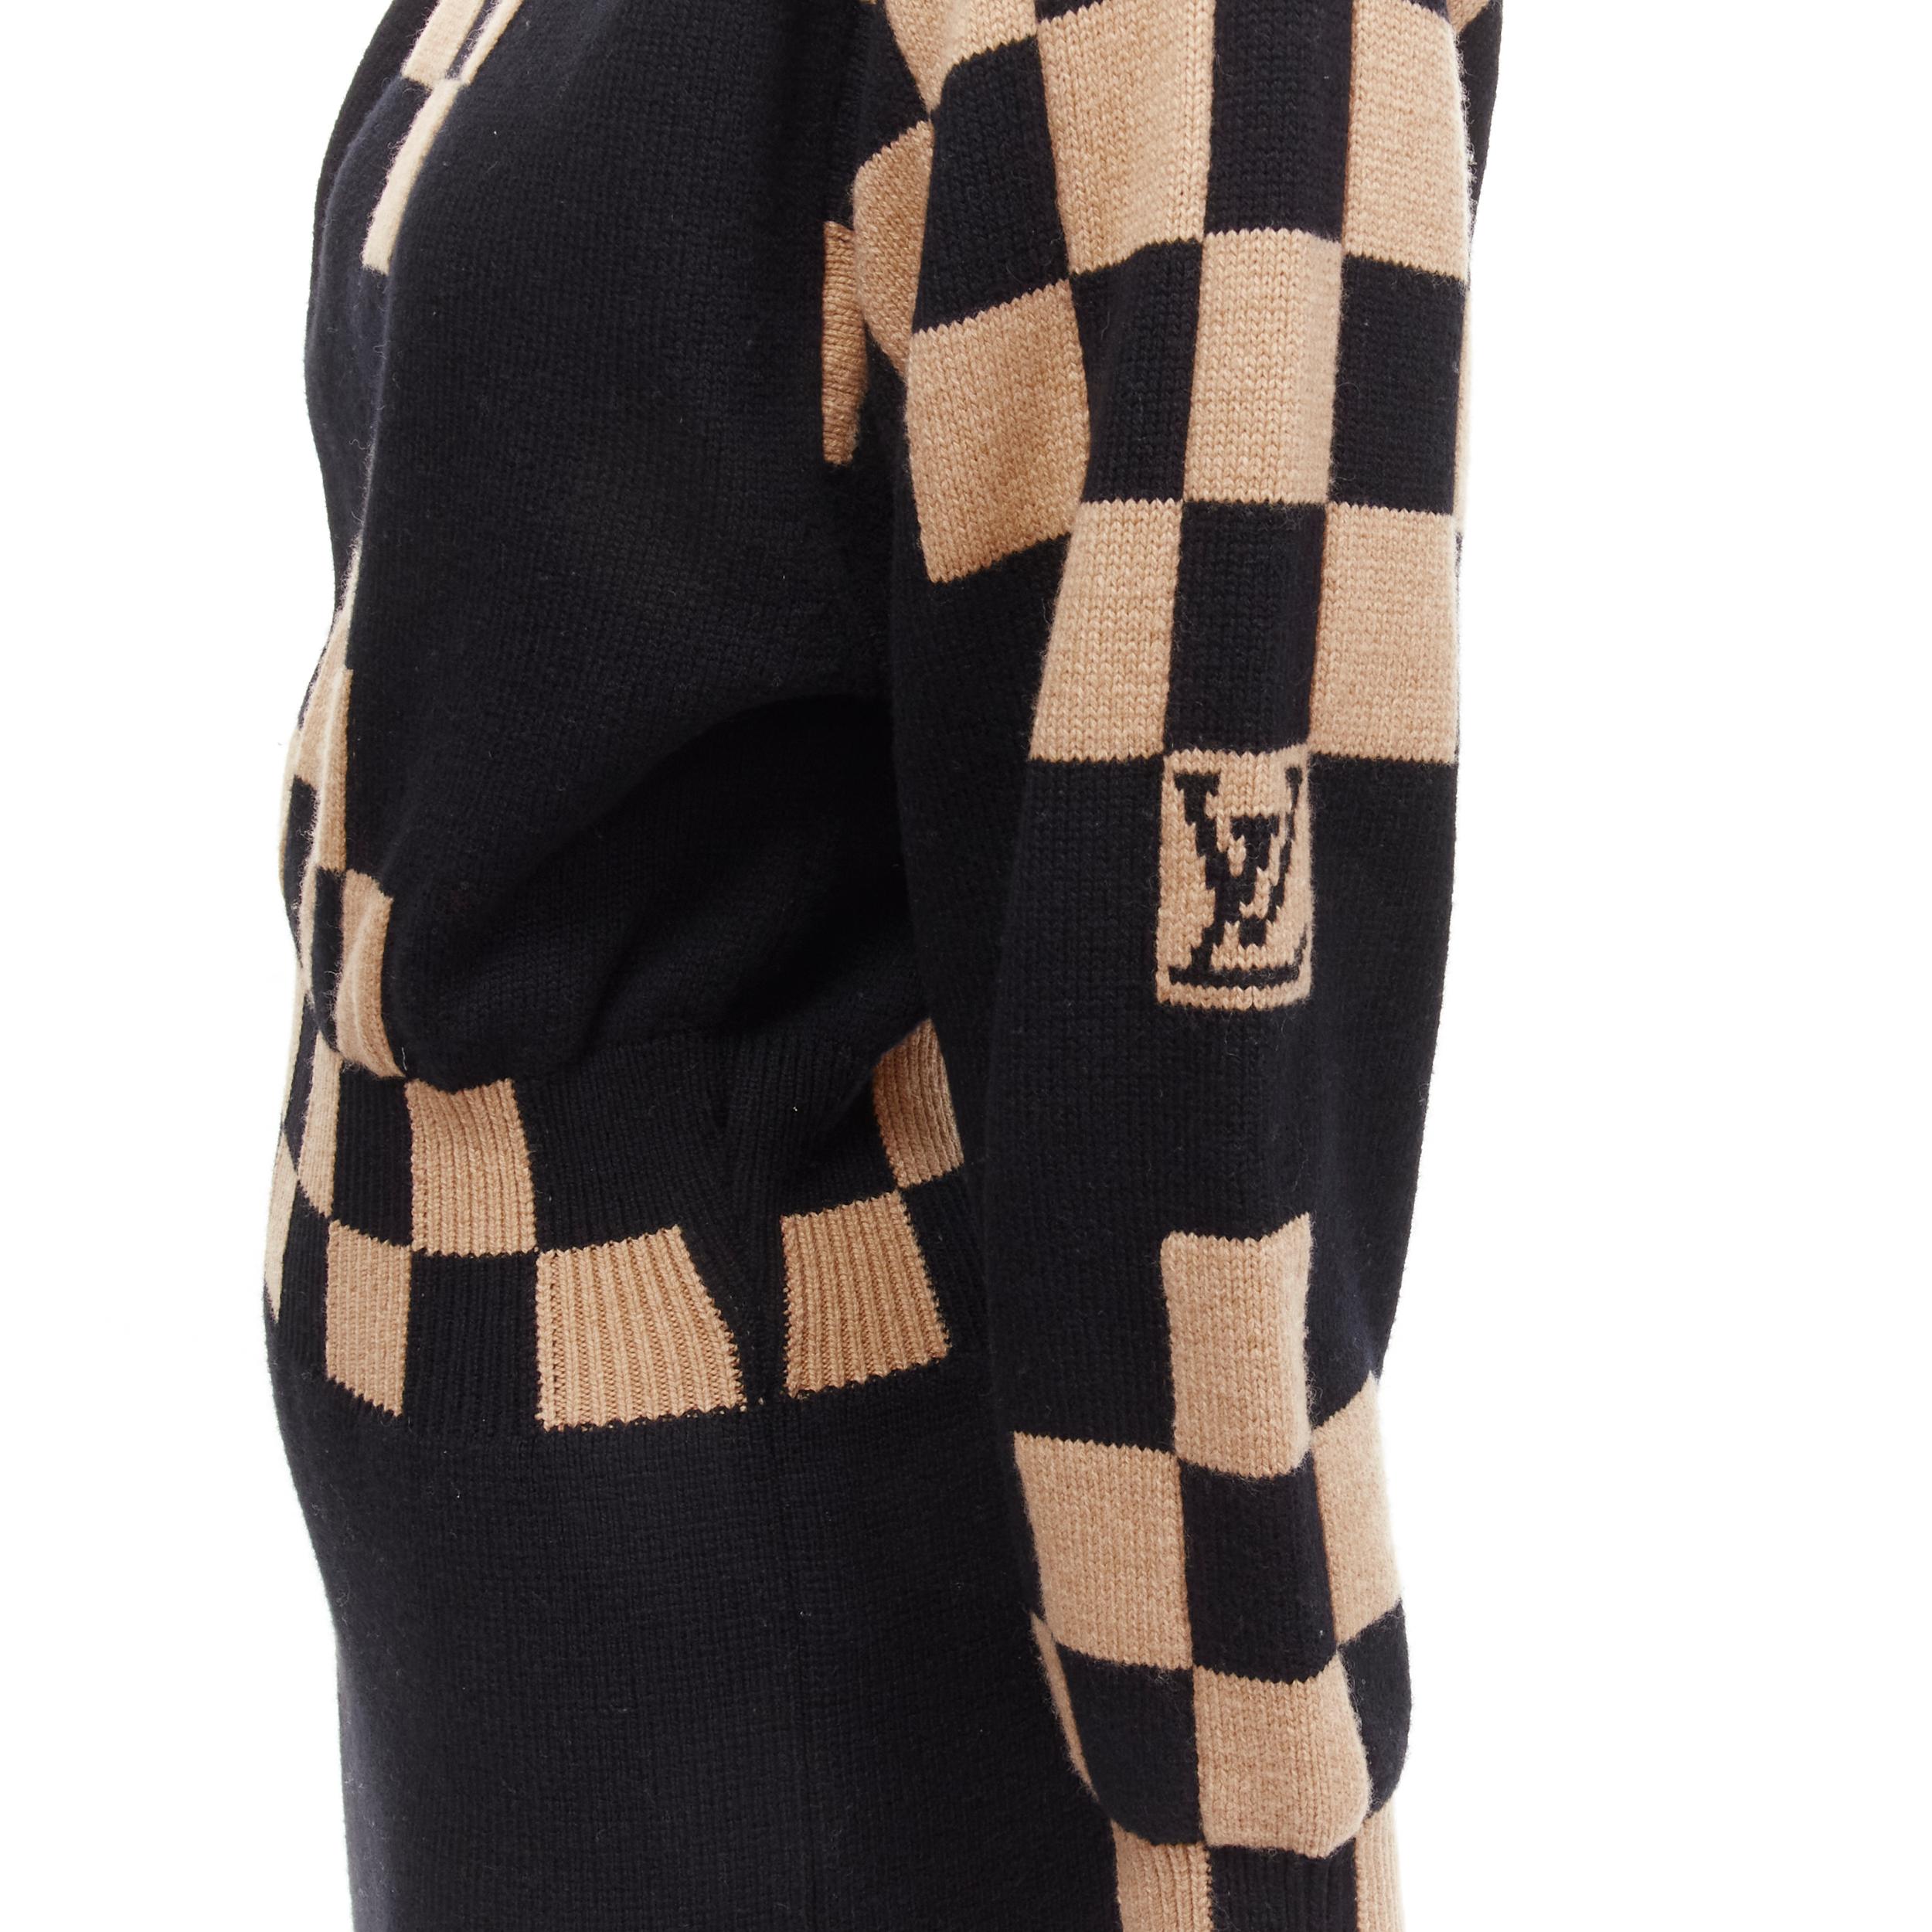 LOUIS VUITTON LV Damier wool cashmere pixel illusion knit dress S
Reference: TGAS/C01897
Brand: Louis Vuitton
Designer: Nicolas Ghesquiere
Material: Wool, Cashmere
Color: Black, Brown
Pattern: Checkered
Closure: Pullover
Extra Details: LV logo on